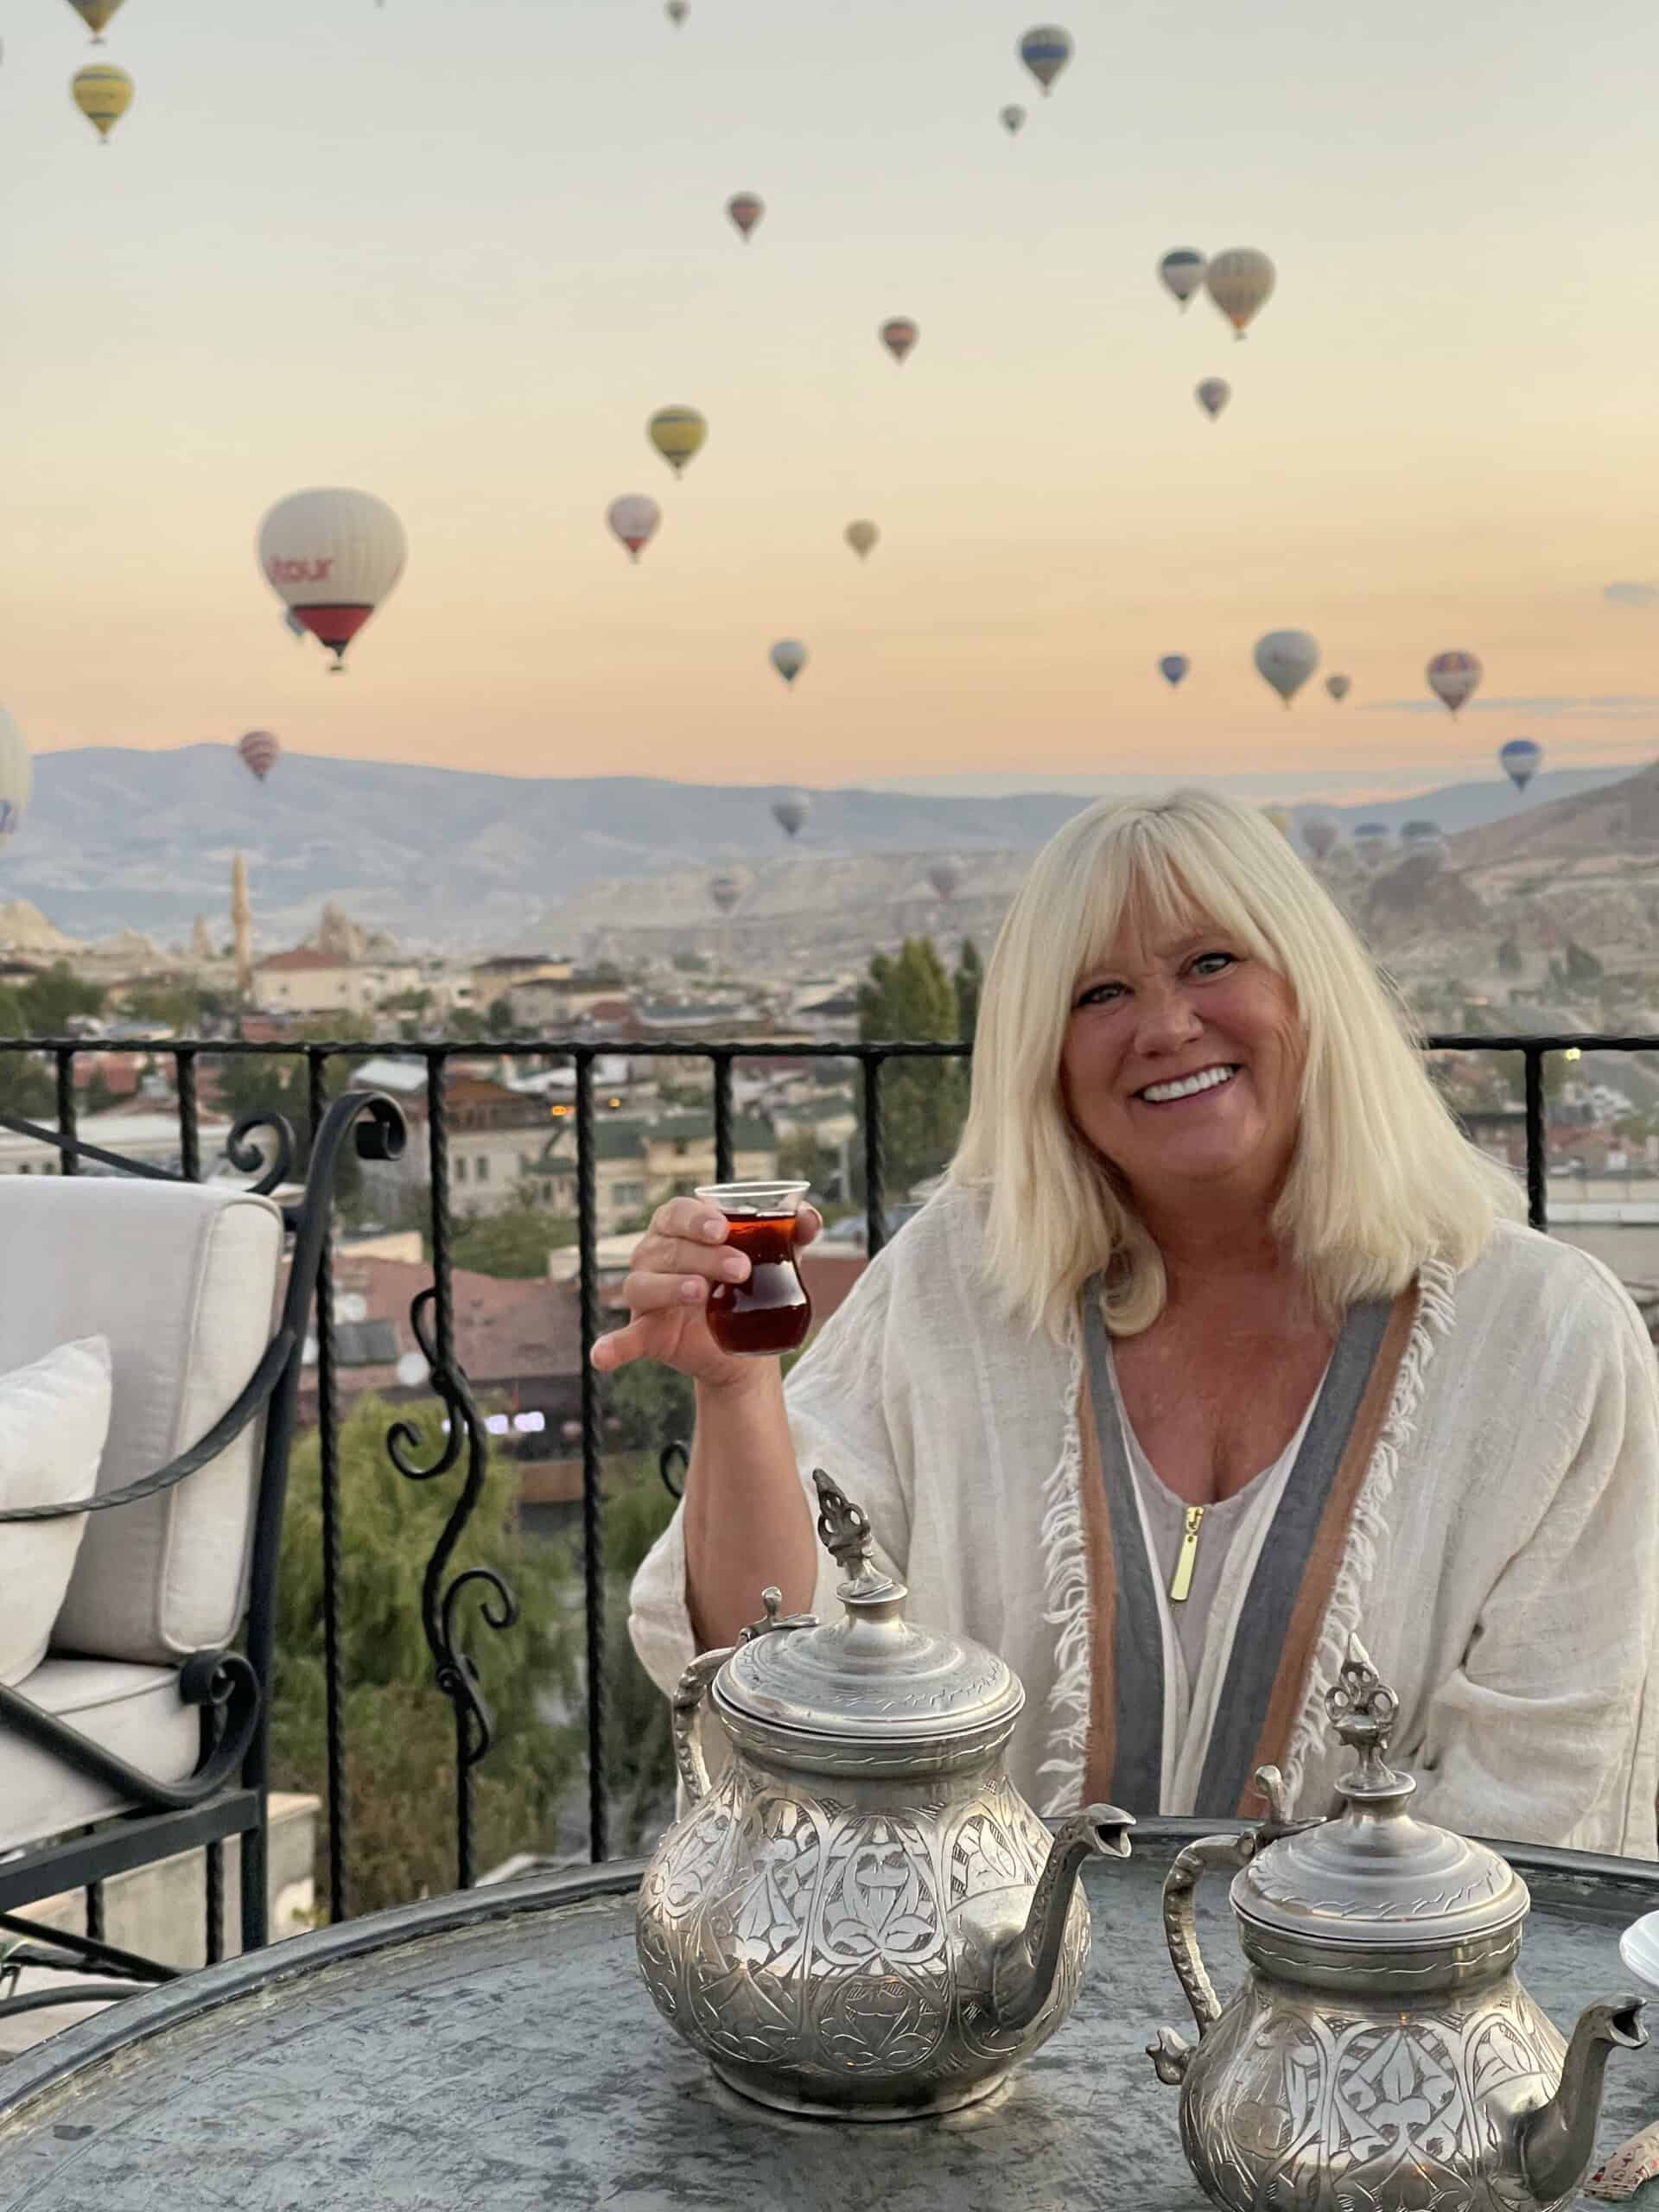 Having a cup of Turkish Tea on a balcony in Cappadocia with dozens of hot air balloons in the background.